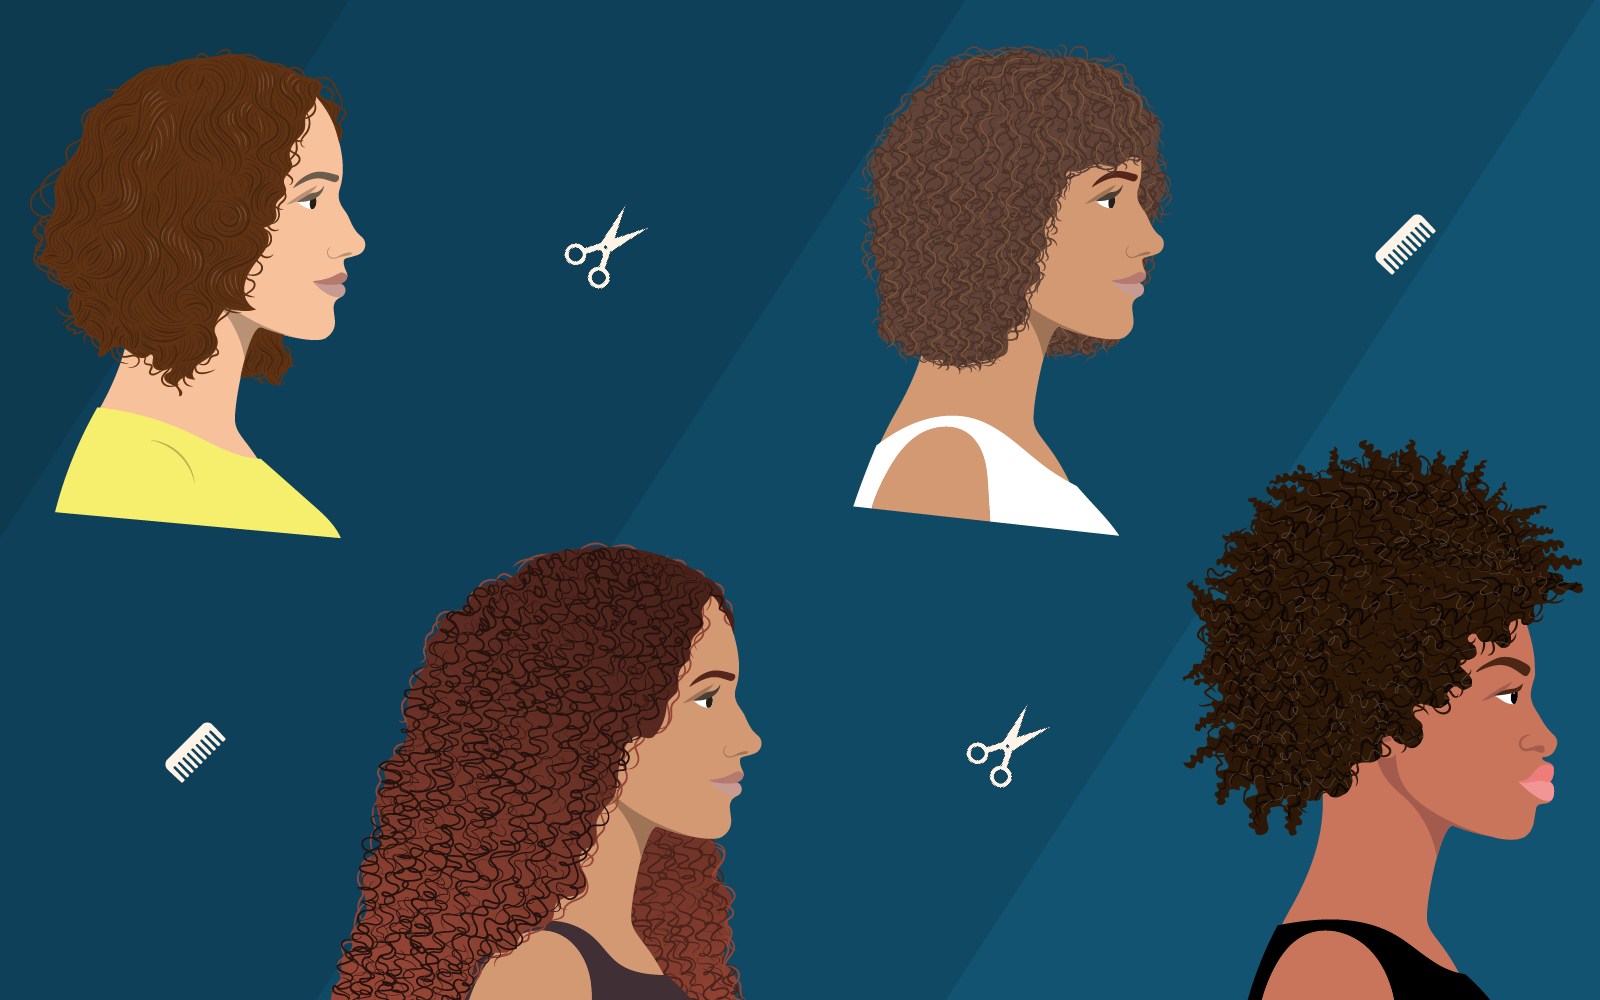 The 20 Best Hair Colors for Curly Hair in 2023